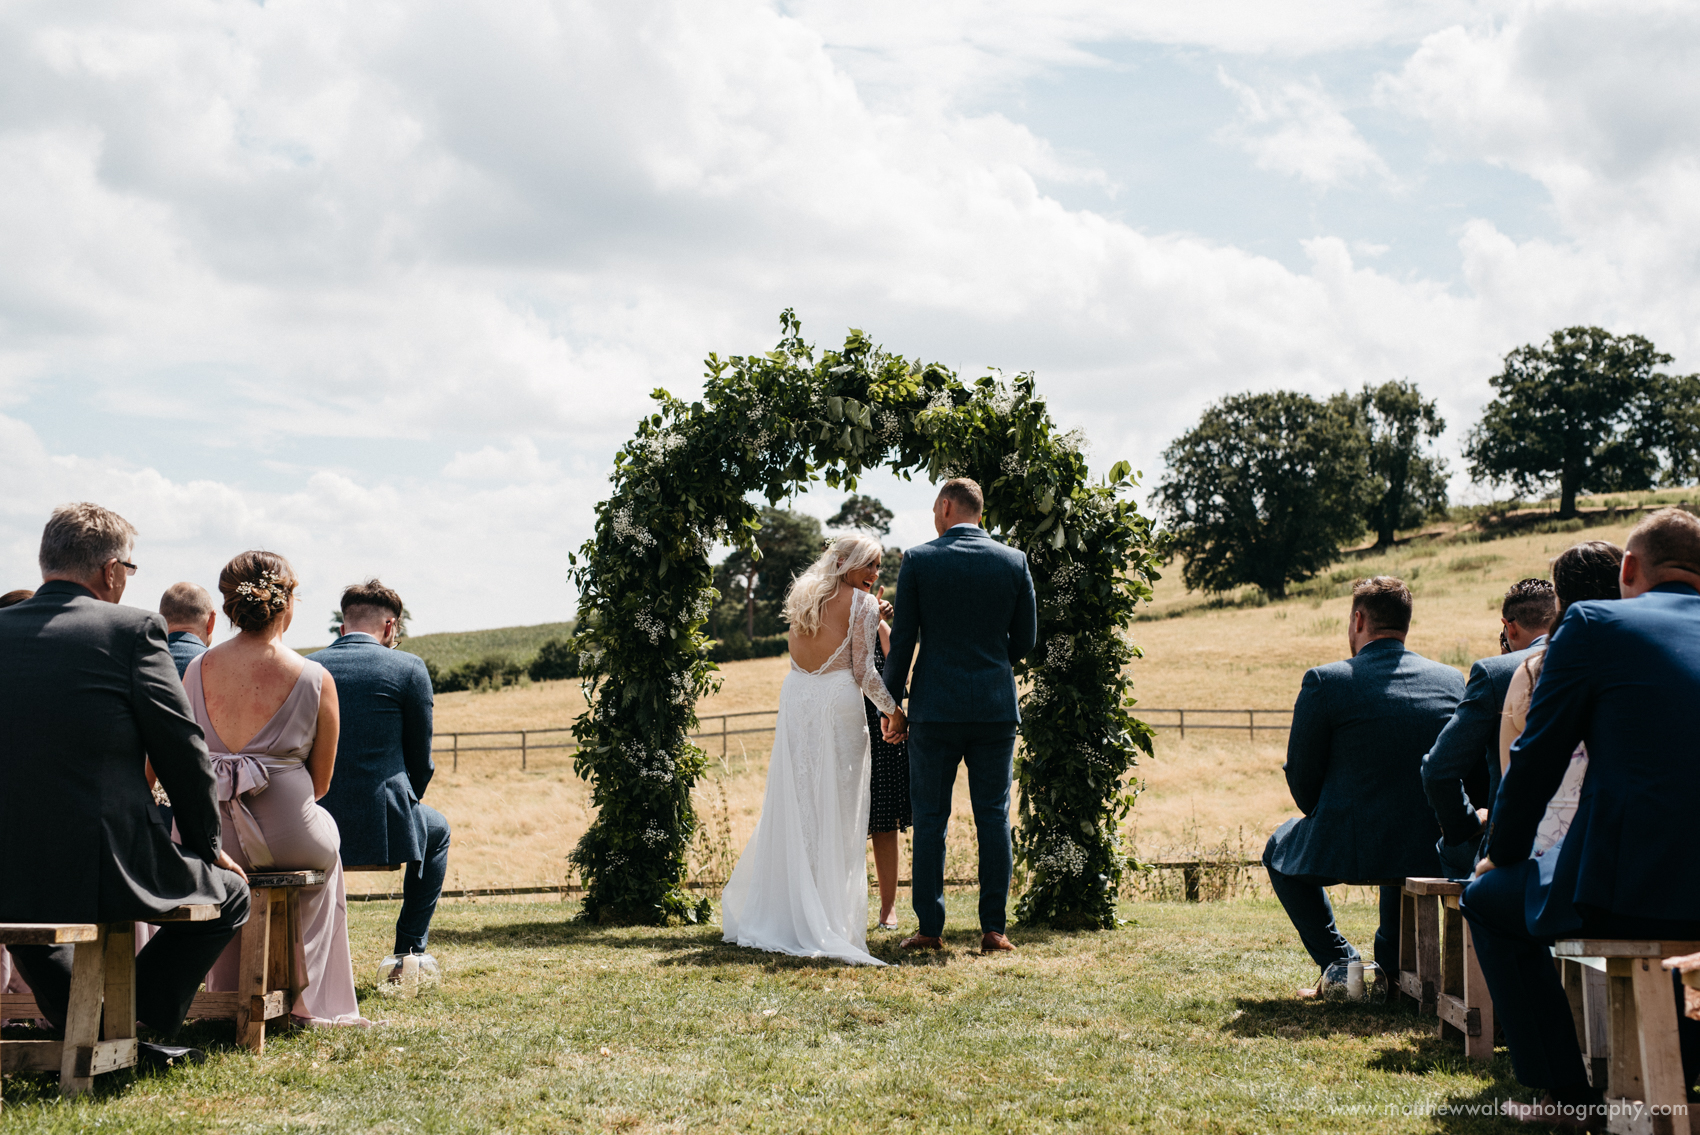 Making their vows under a floral arch that they have made themselves